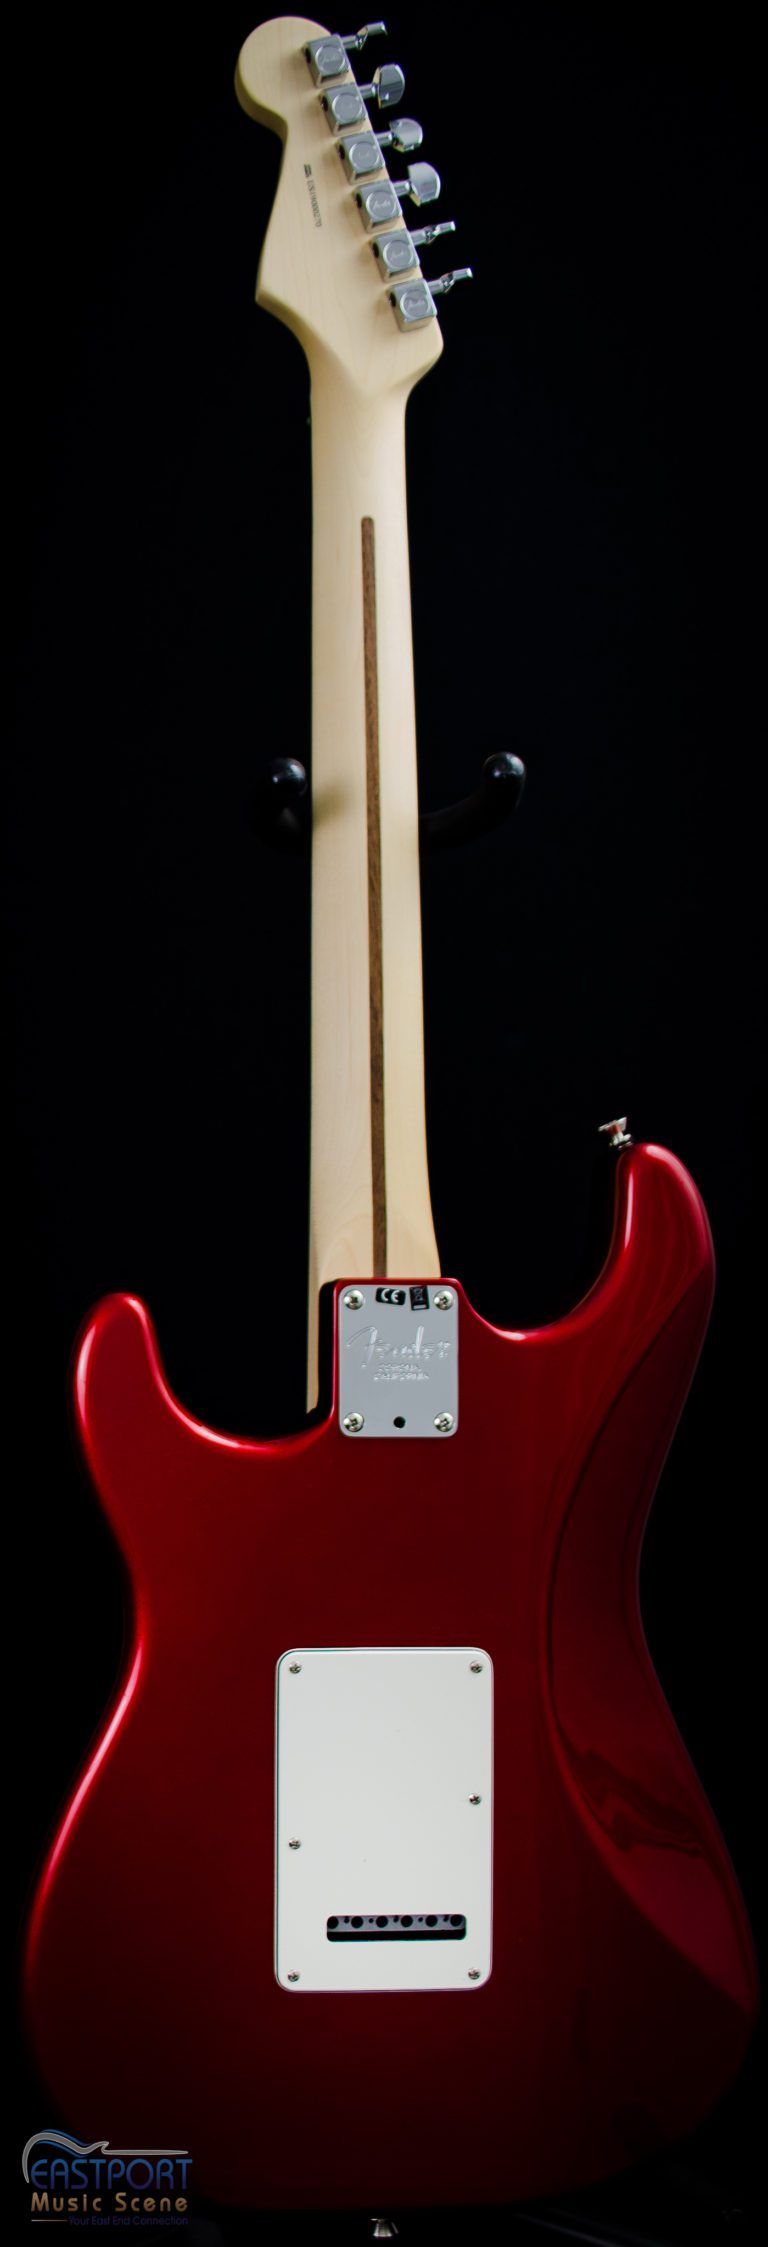 A red electric guitar with two white strings.